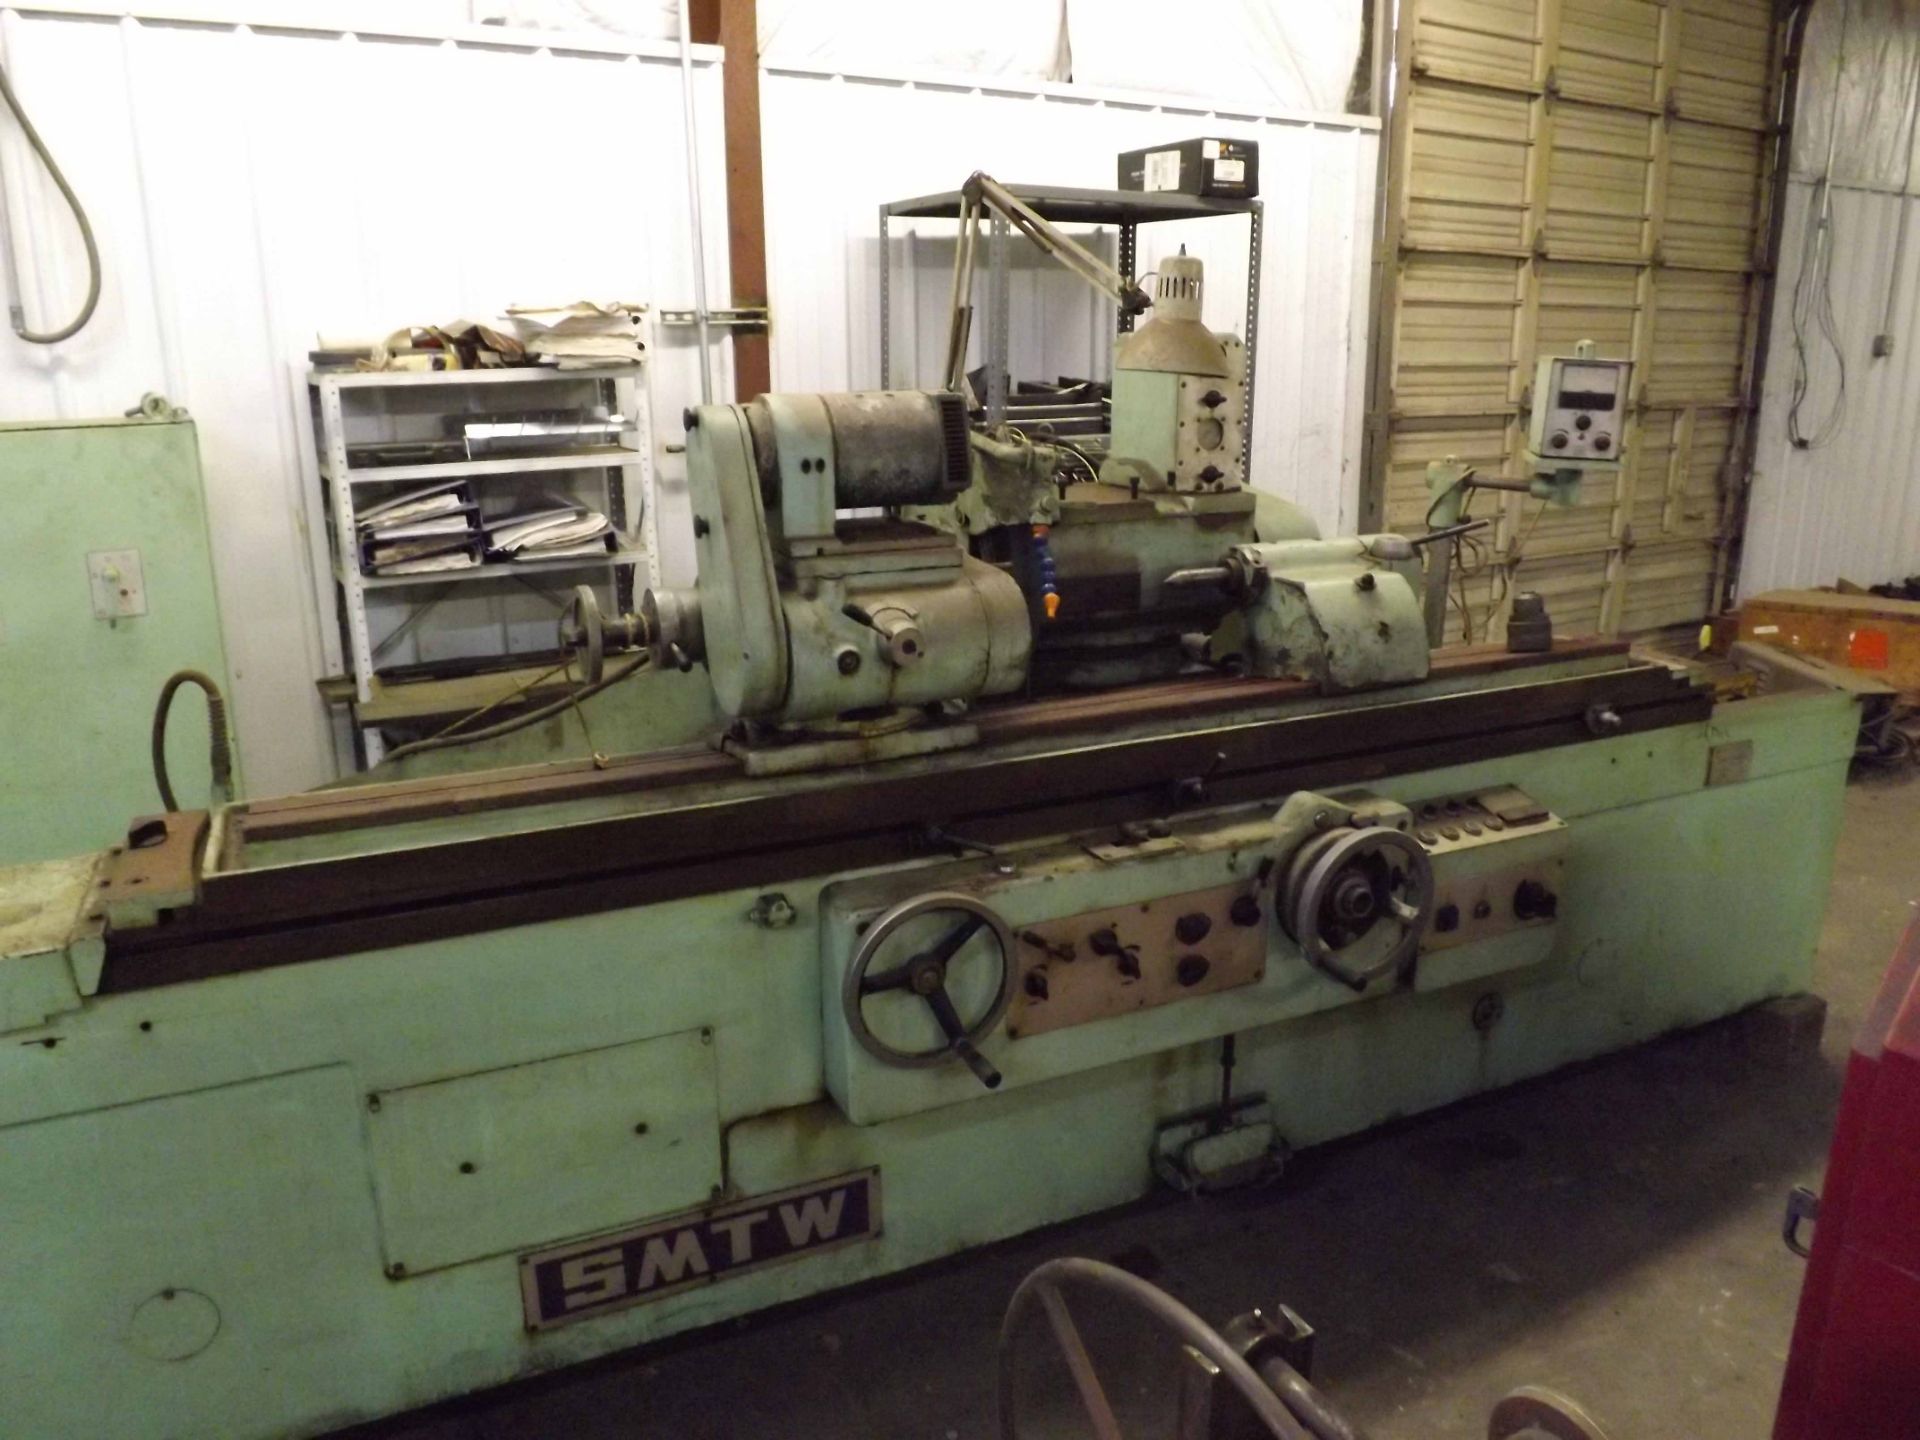 SMTW 12” X 60” MDL. MG1432AX1500 GRINDER, S/N 294 The client will load this machine for an